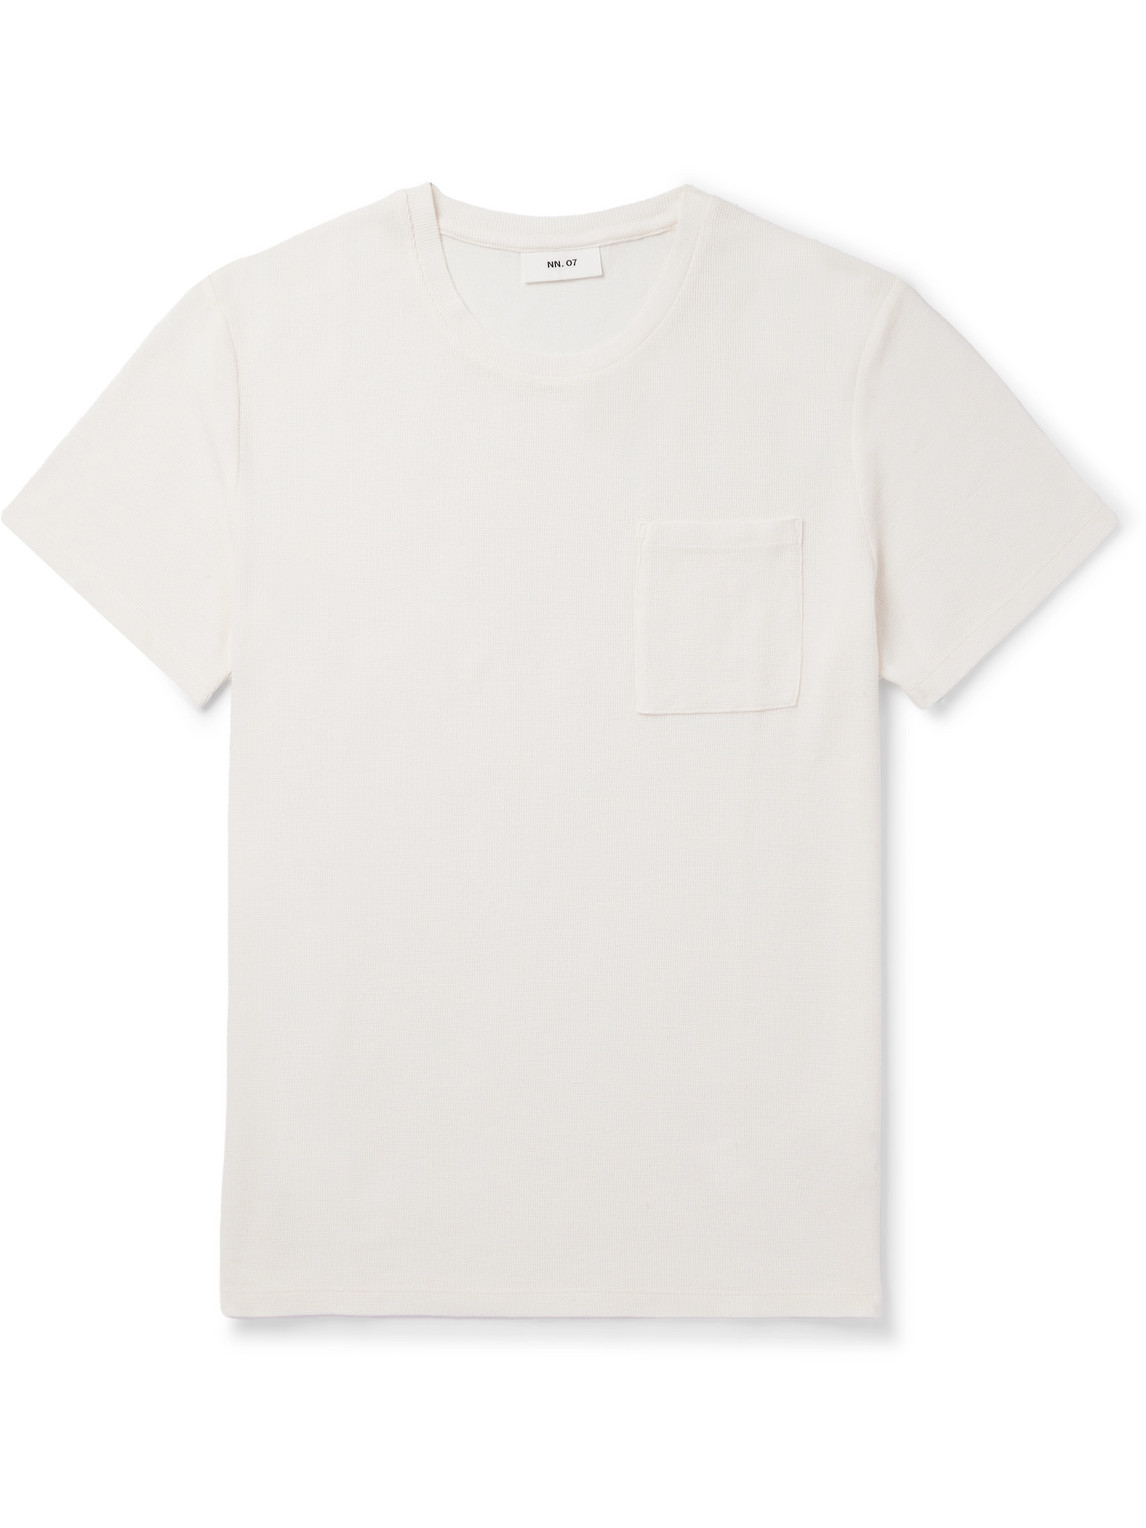 Clive 3323 Waffle-Knit Cotton and TENCEL™ Modal-Blend T-Shirt